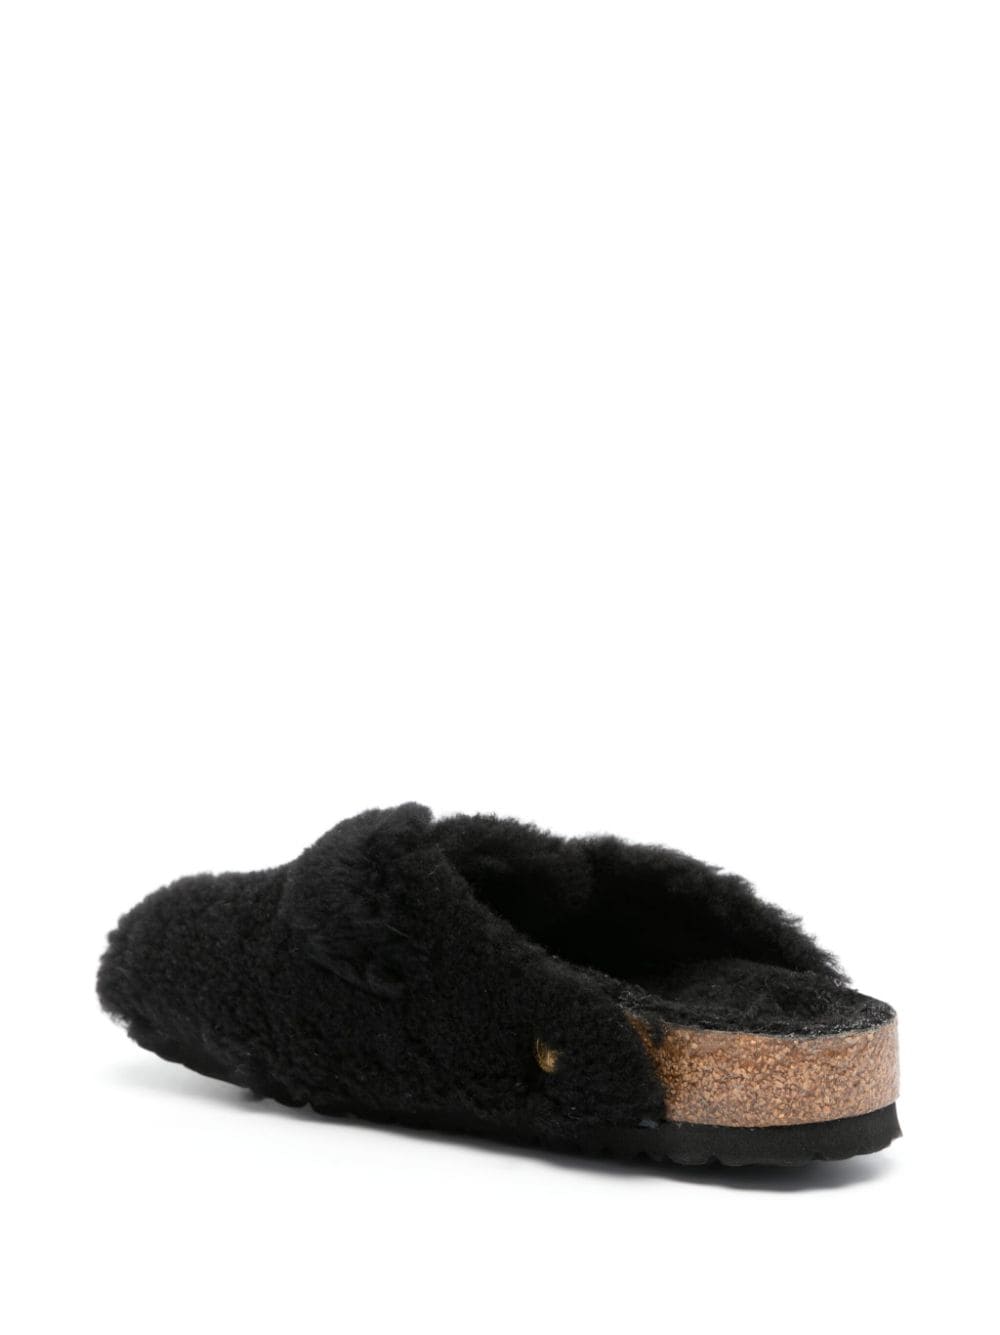 BOSTON BUCKLED SHEARLING SLIPPERS